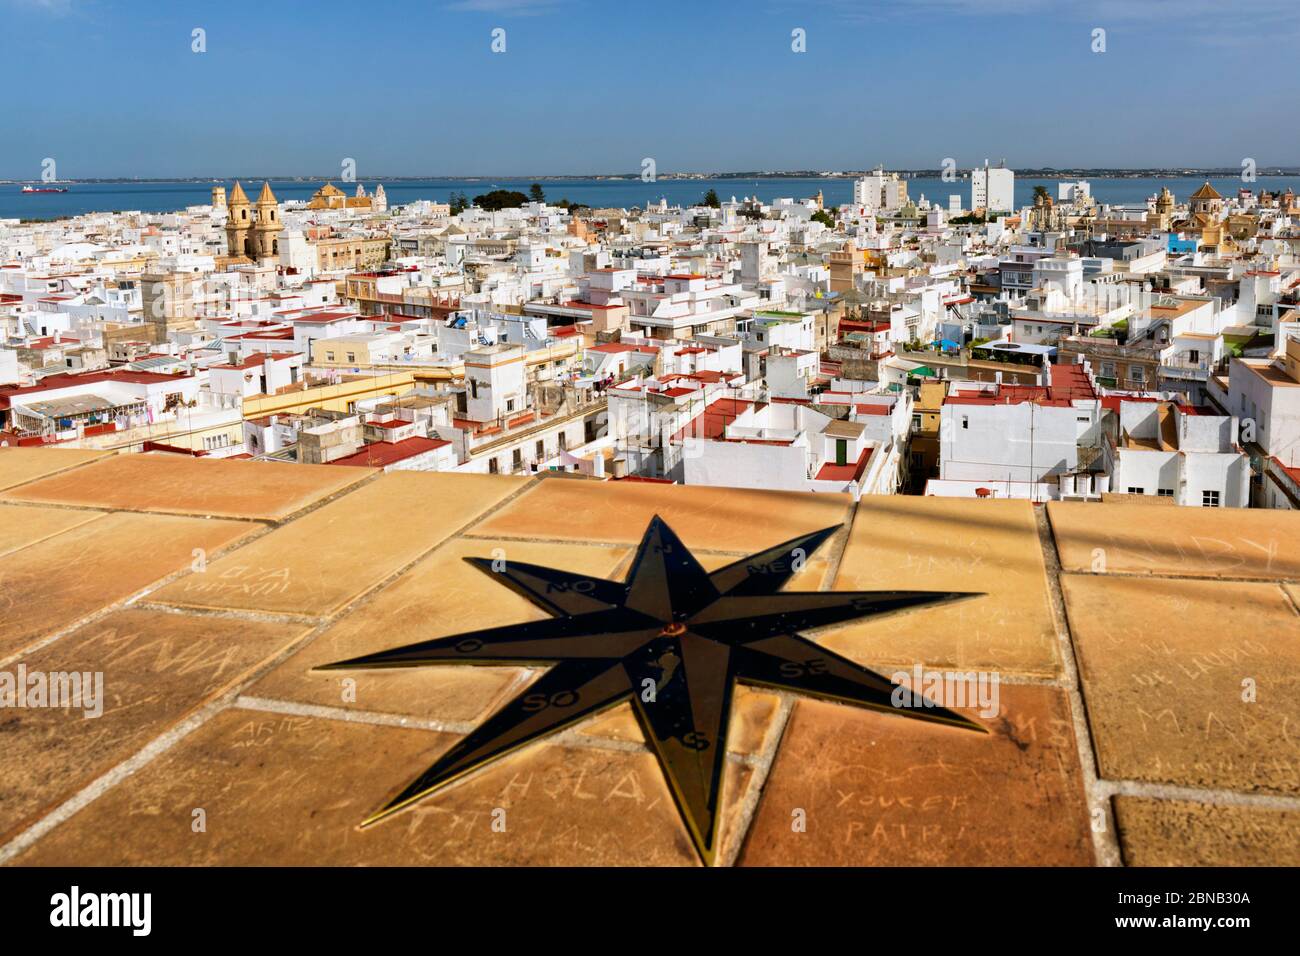 View of the old town from the Torre Tavira, Cadiz, Cadiz Province, Costa de la Luz, Andalusia, Spain.  The church is that of San Antonio. Stock Photo